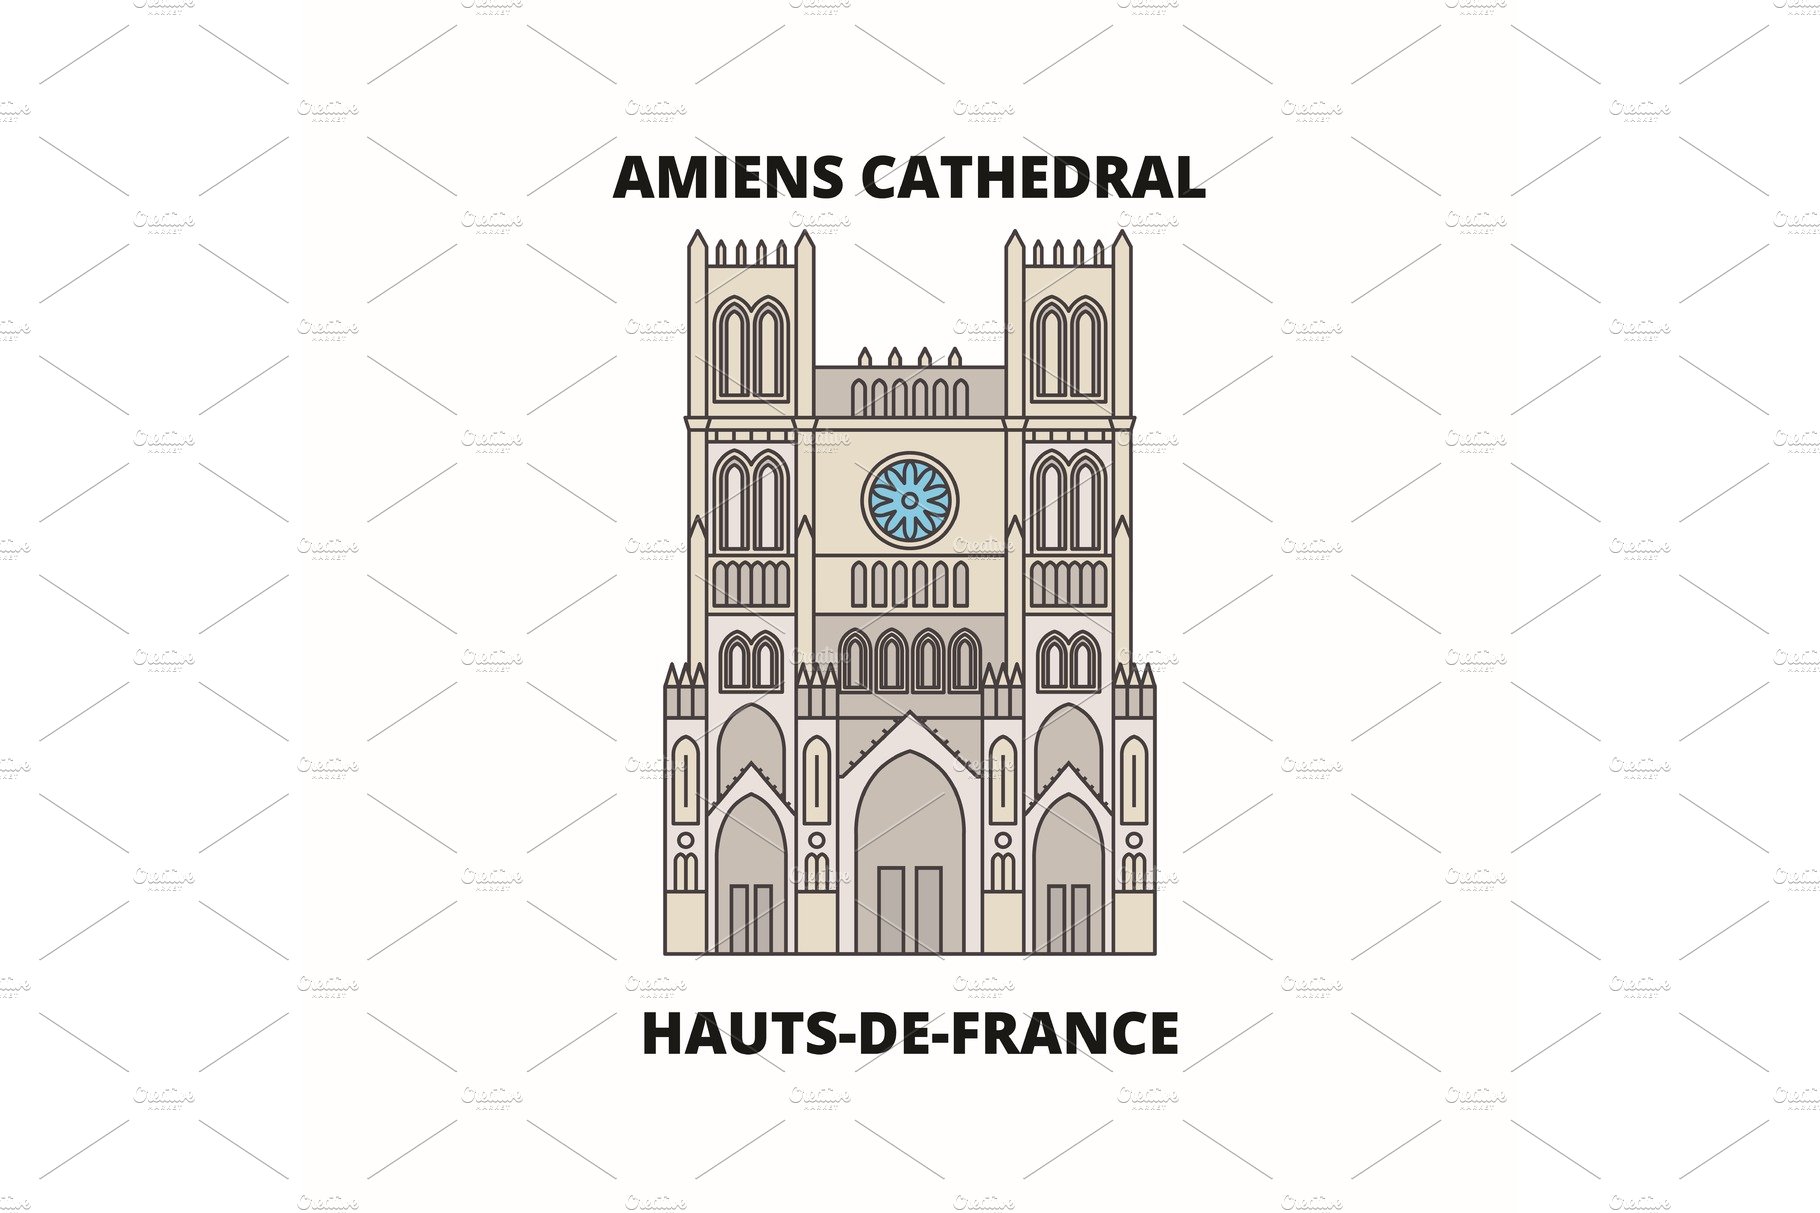 Hauts-De-France - Amiens Cathedral cover image.